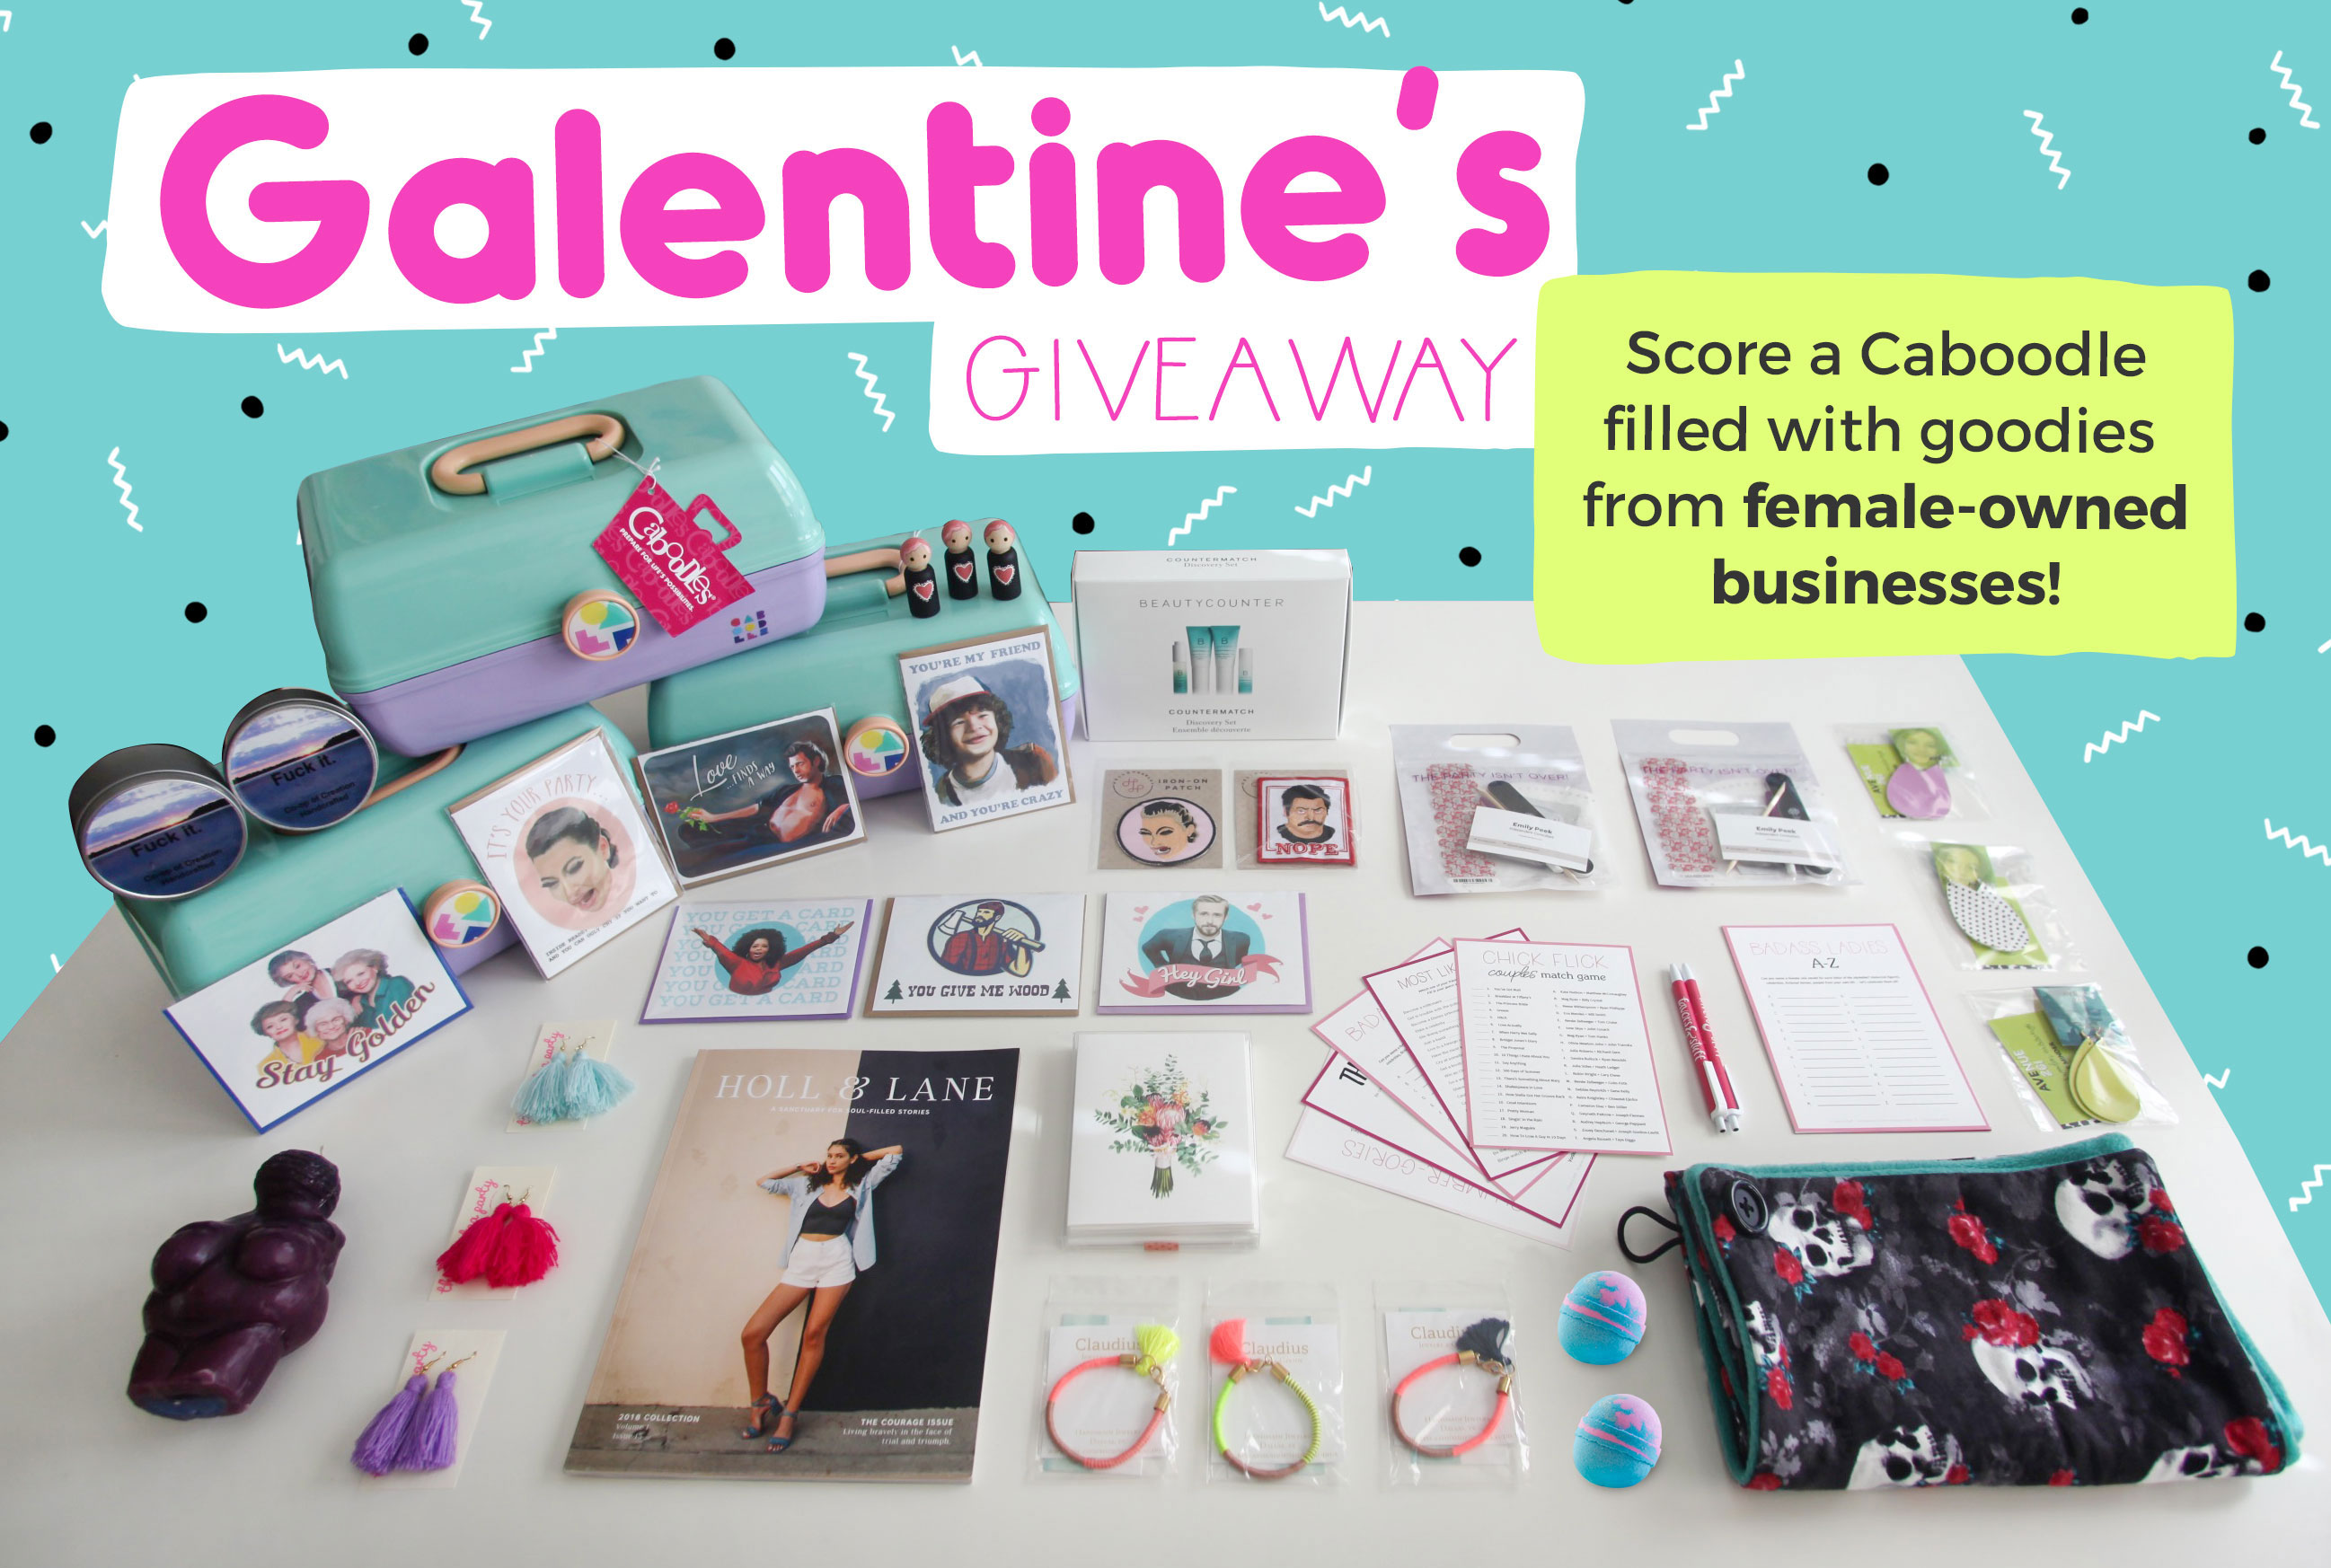 Galentines - Celebrating Women and Female Friendships | Favors & Stuff